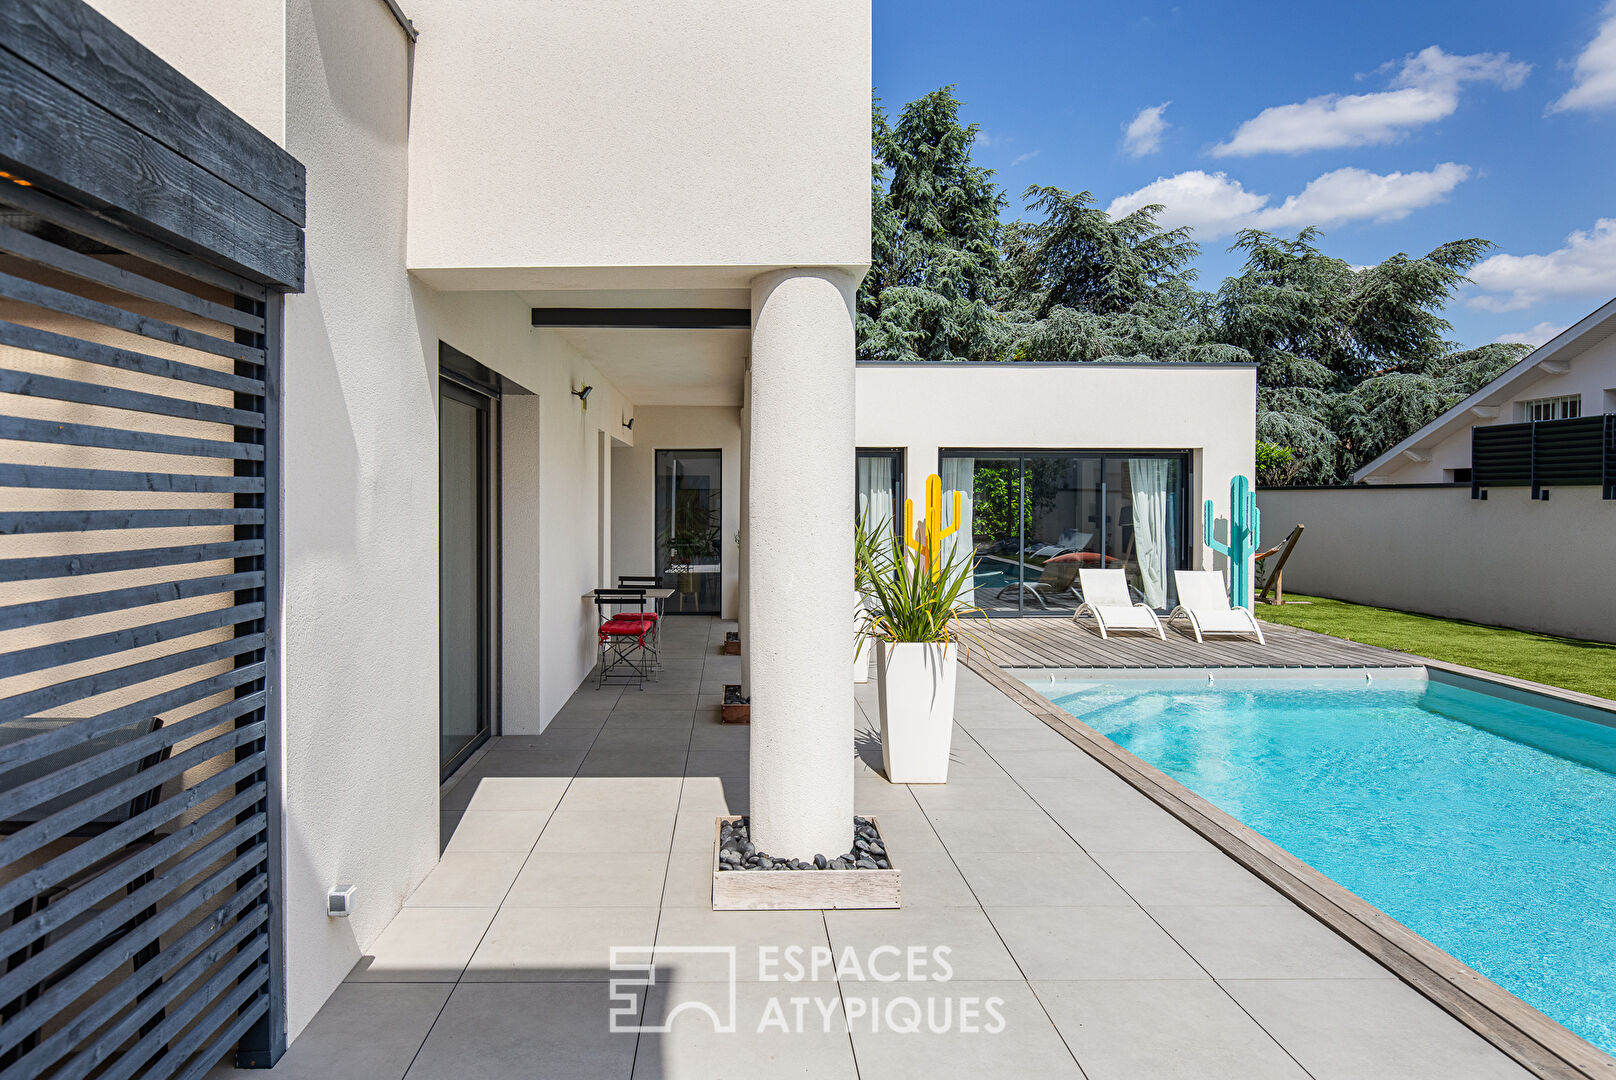 Contemporary with outbuilding and swimming pool close to the city center